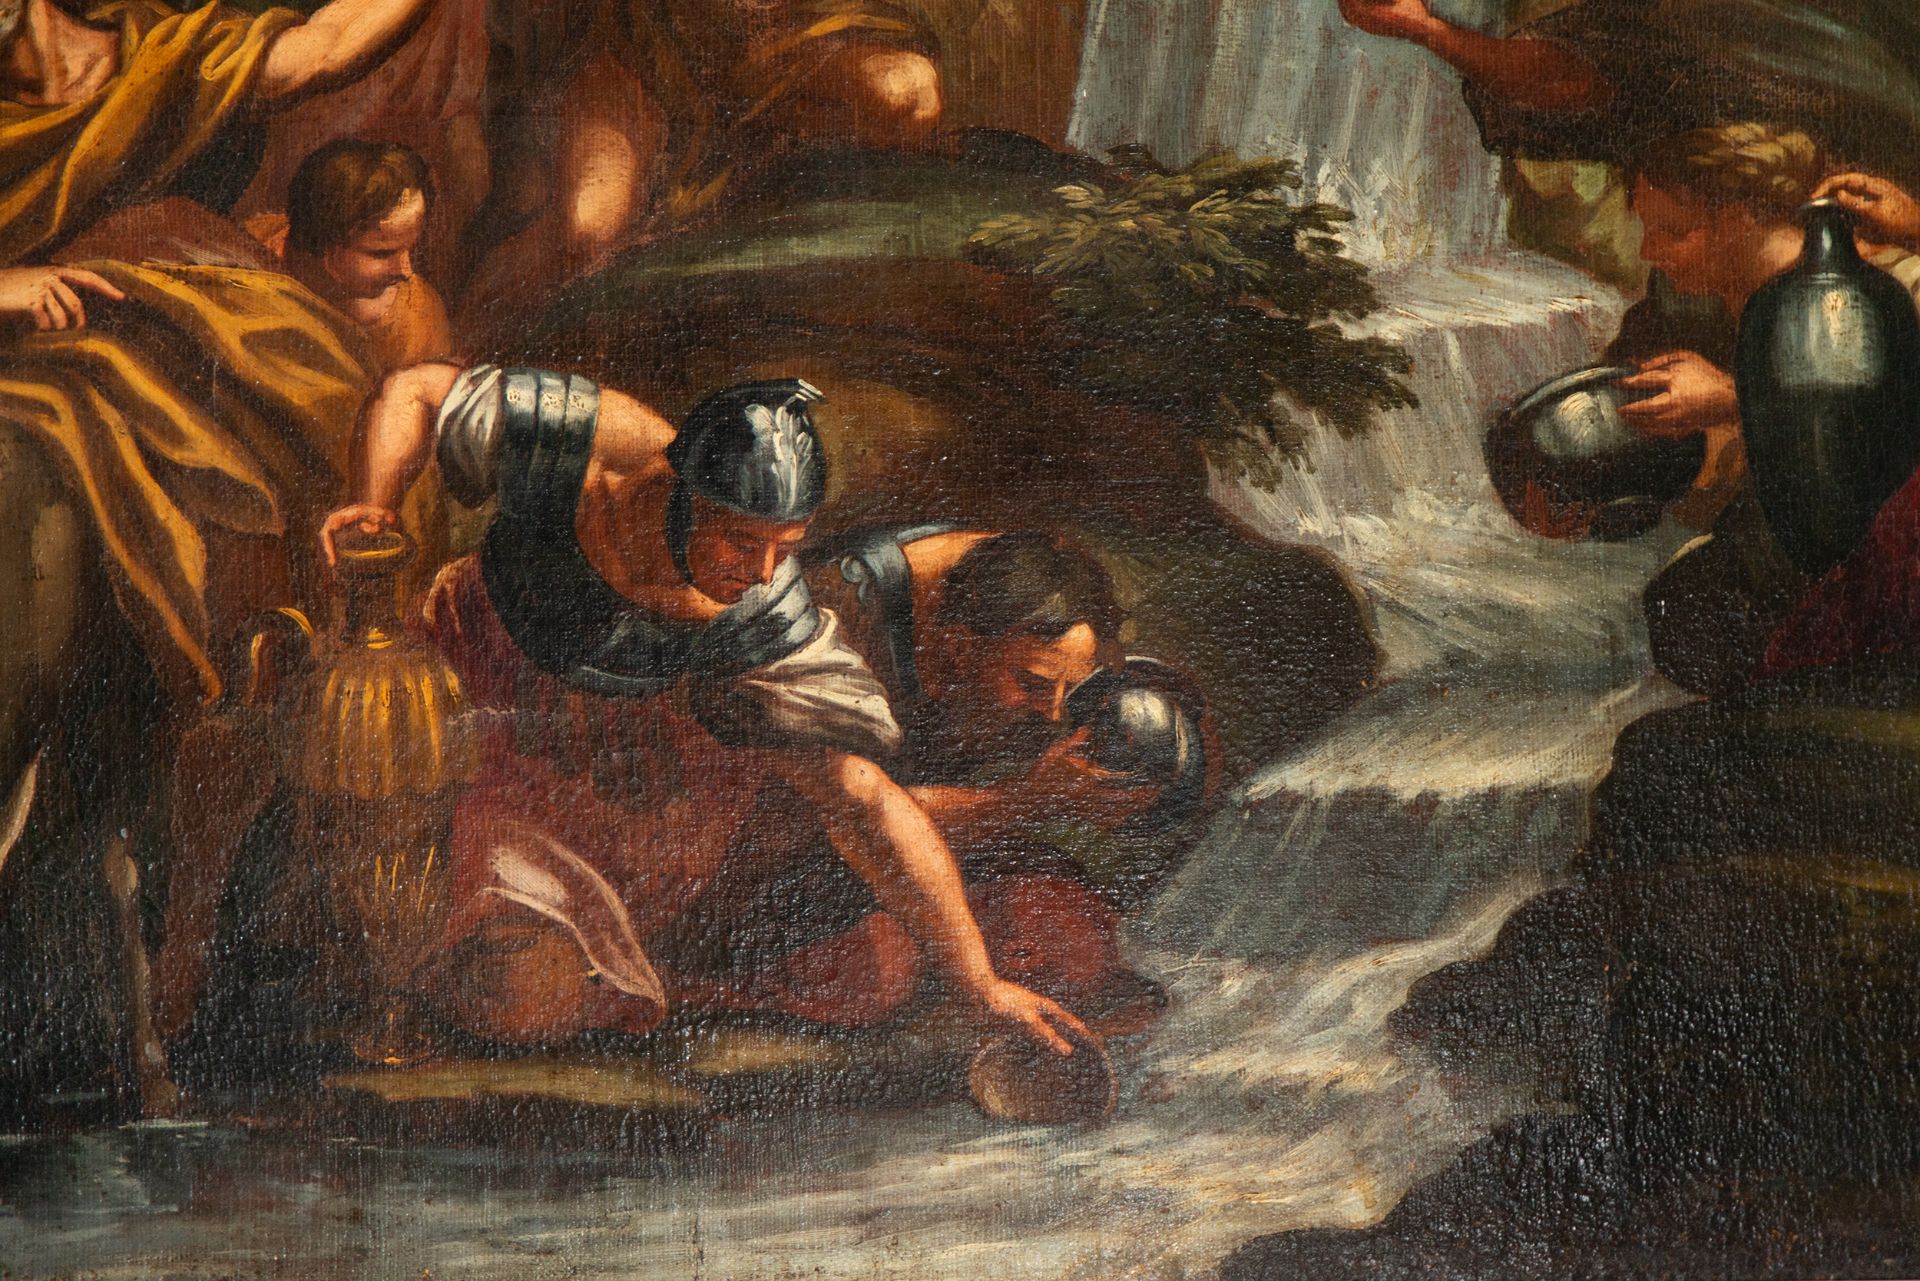 Elysium purifying the corrupt Waters, Italian school of the 17th century - Image 3 of 7